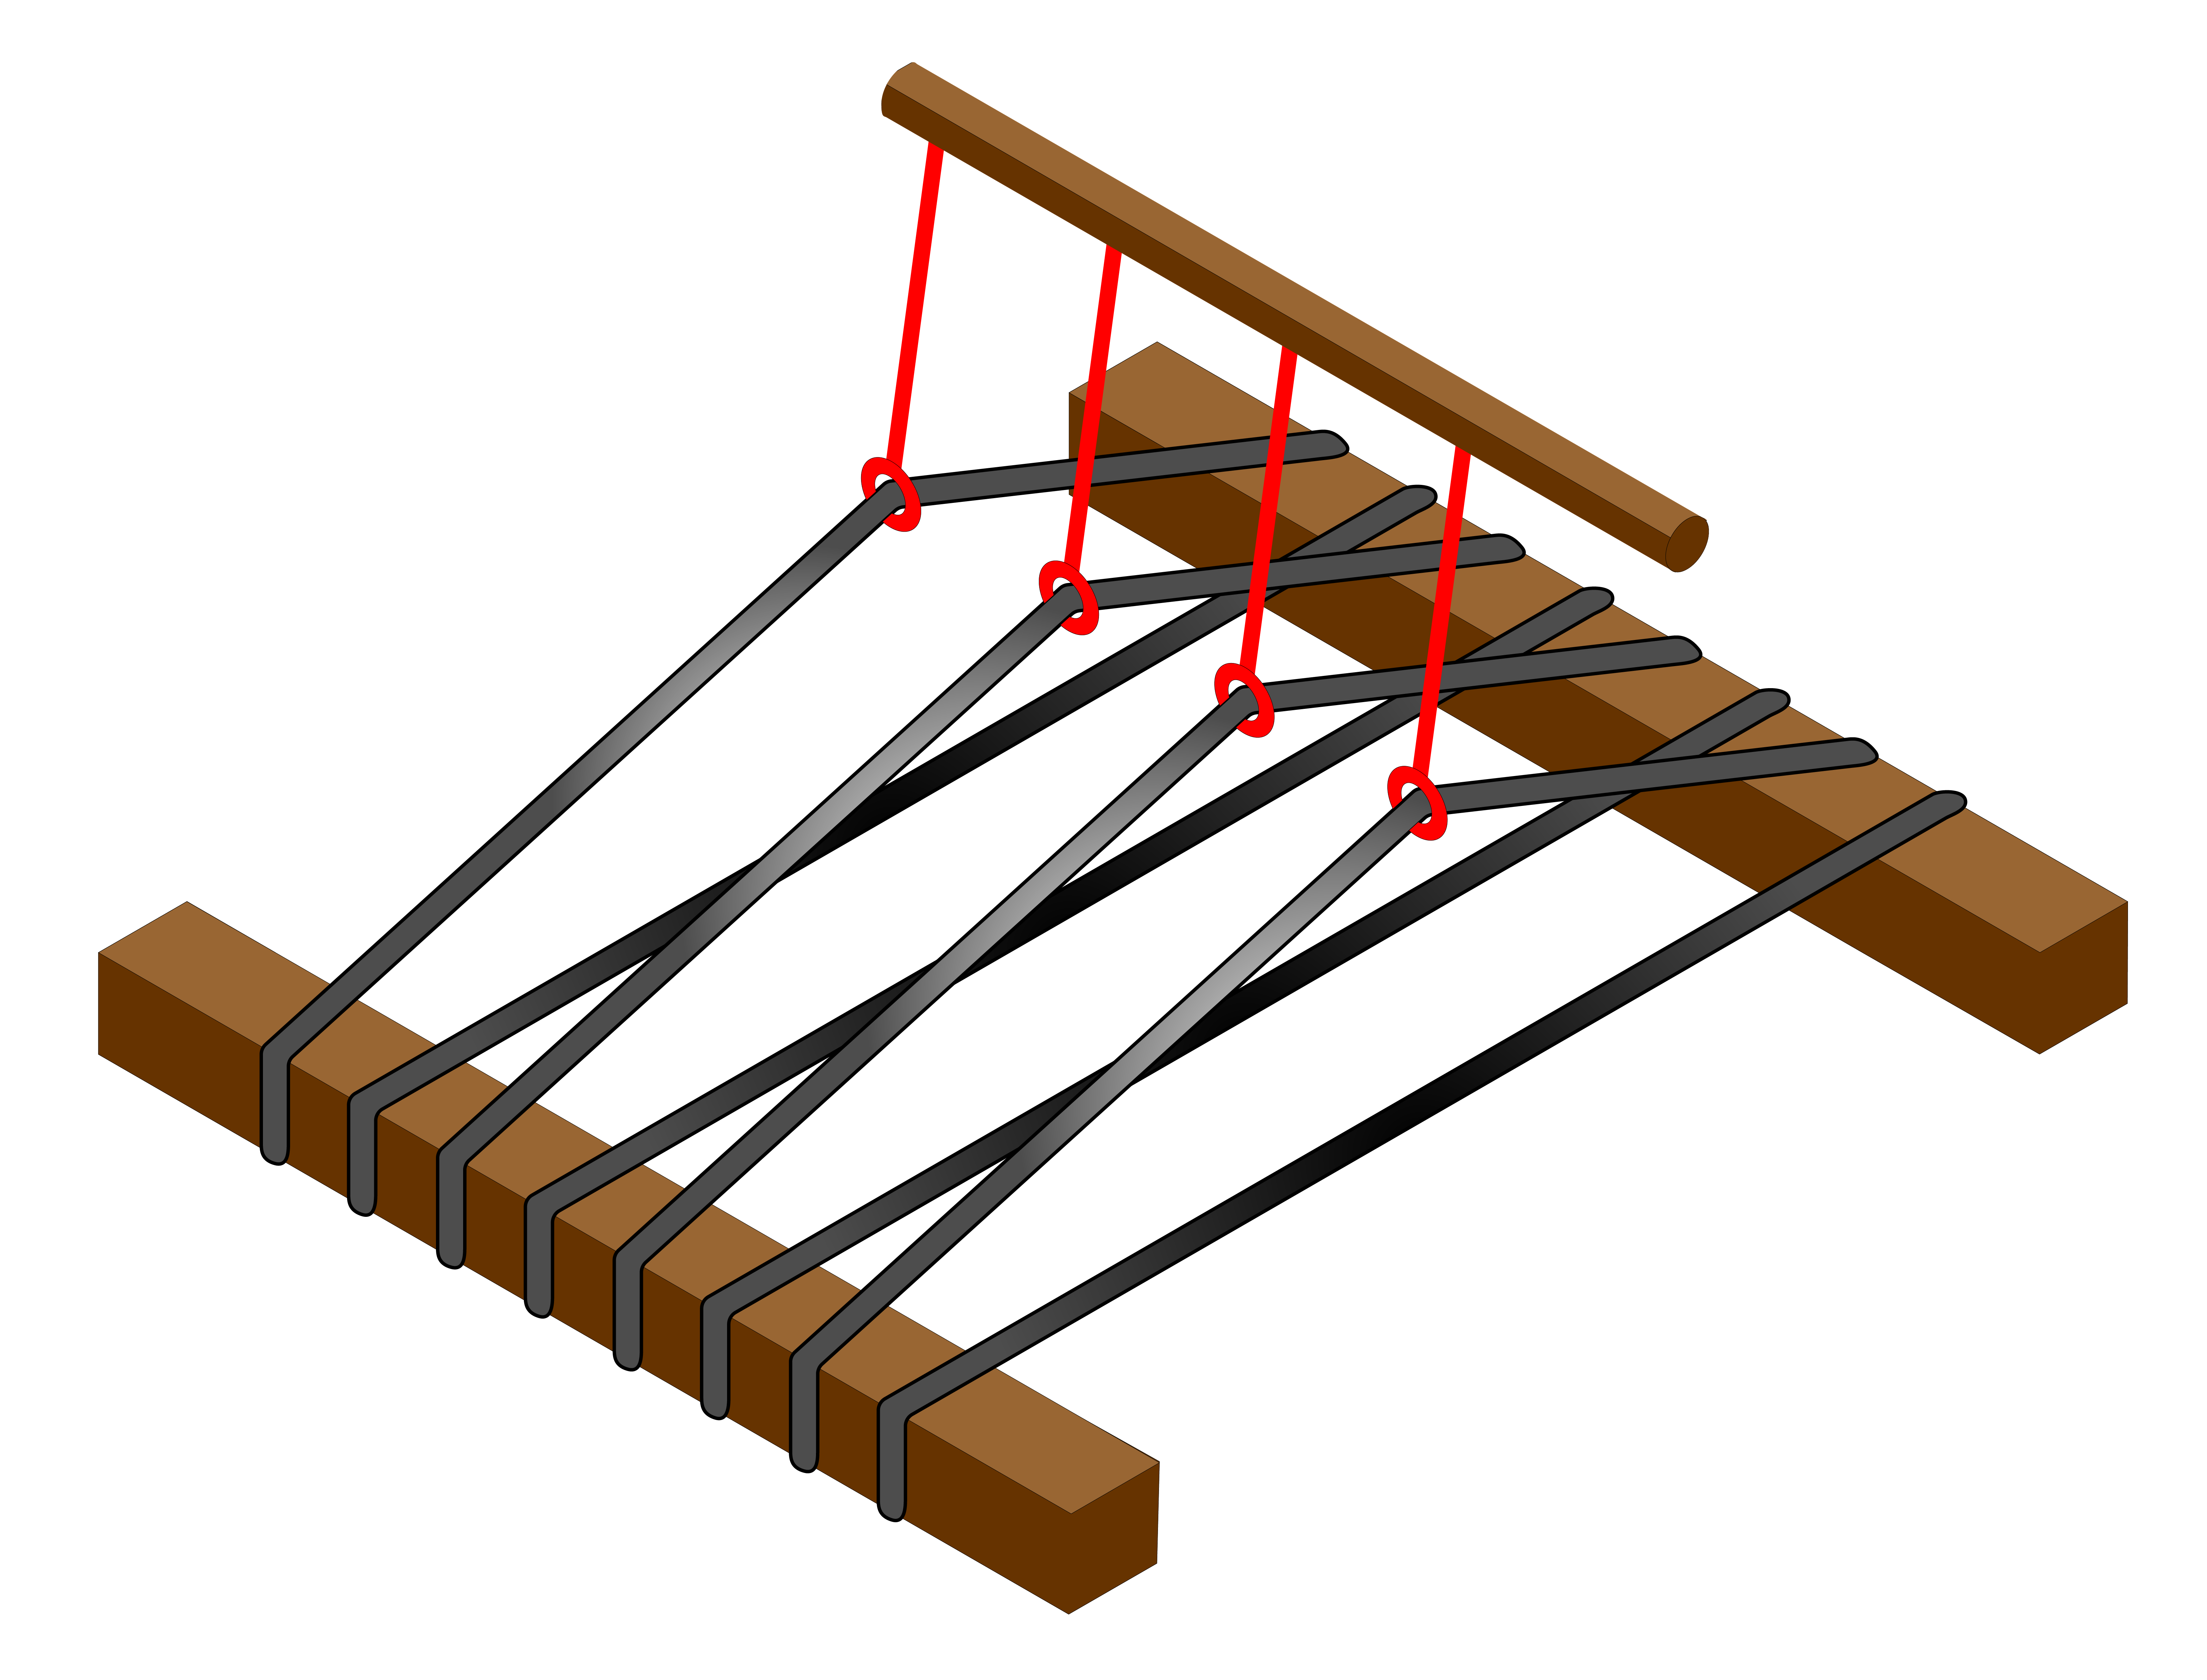 An illustration of a loom with a single shaft added, with heddles controlling every other warp.